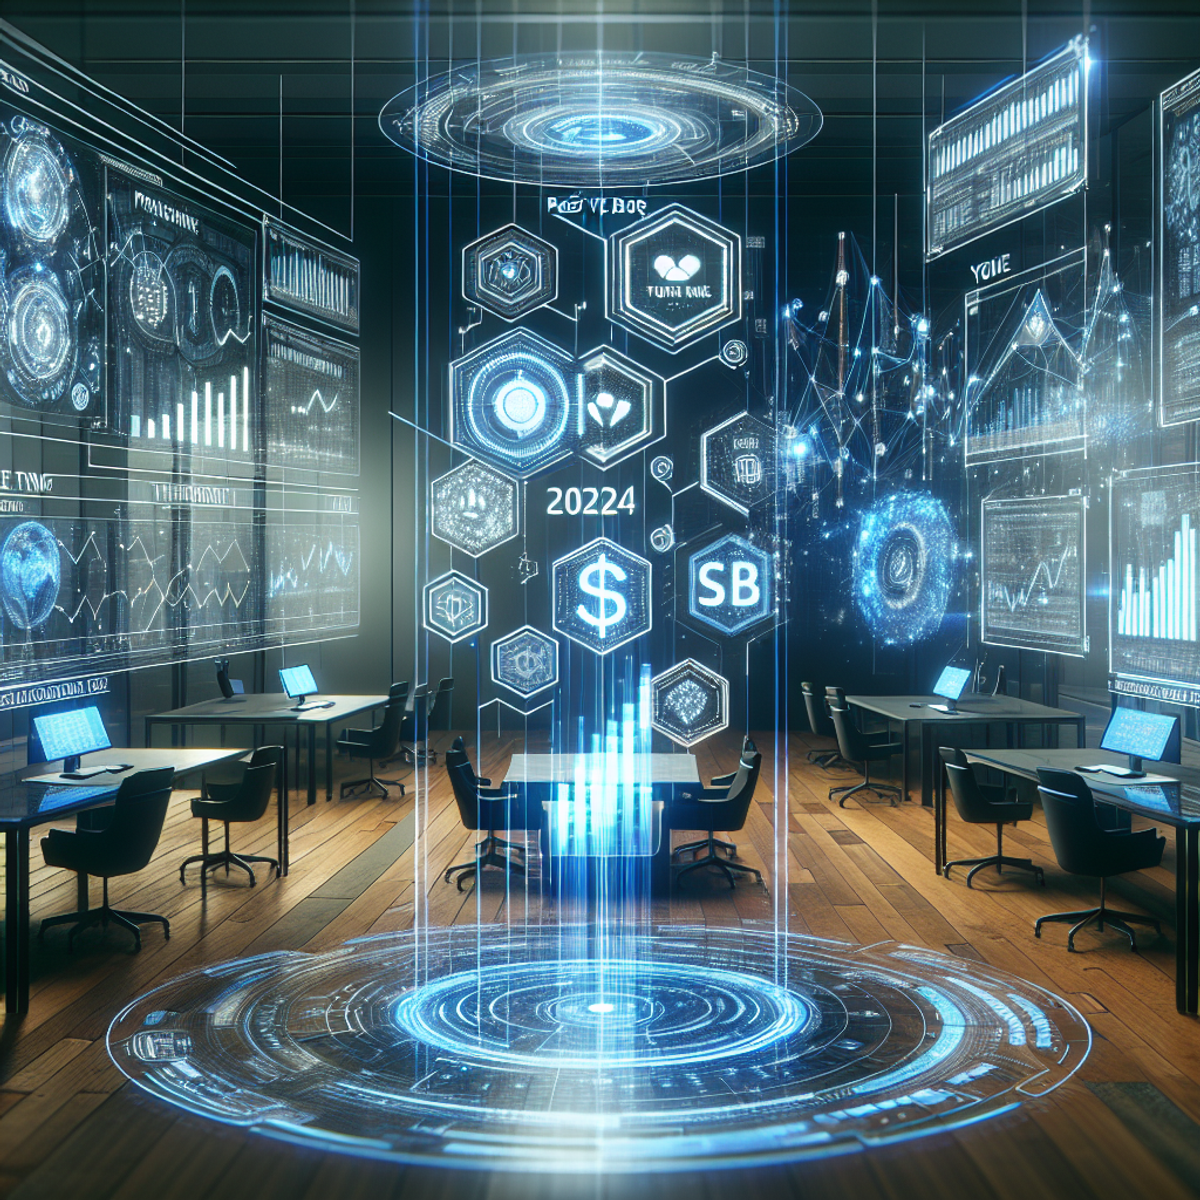 A futuristic office space full of advanced technology. Intricate holographic charts and graphs are suspended in the air, presenting various investment strategies for passive income streams. The year displayed on each holograph is 2024, suggesting an imminent technological edge in finance. The entire scene is represented in a digital art style, capturing the essence of a future-rich environment with a focus on progressive financial planning.